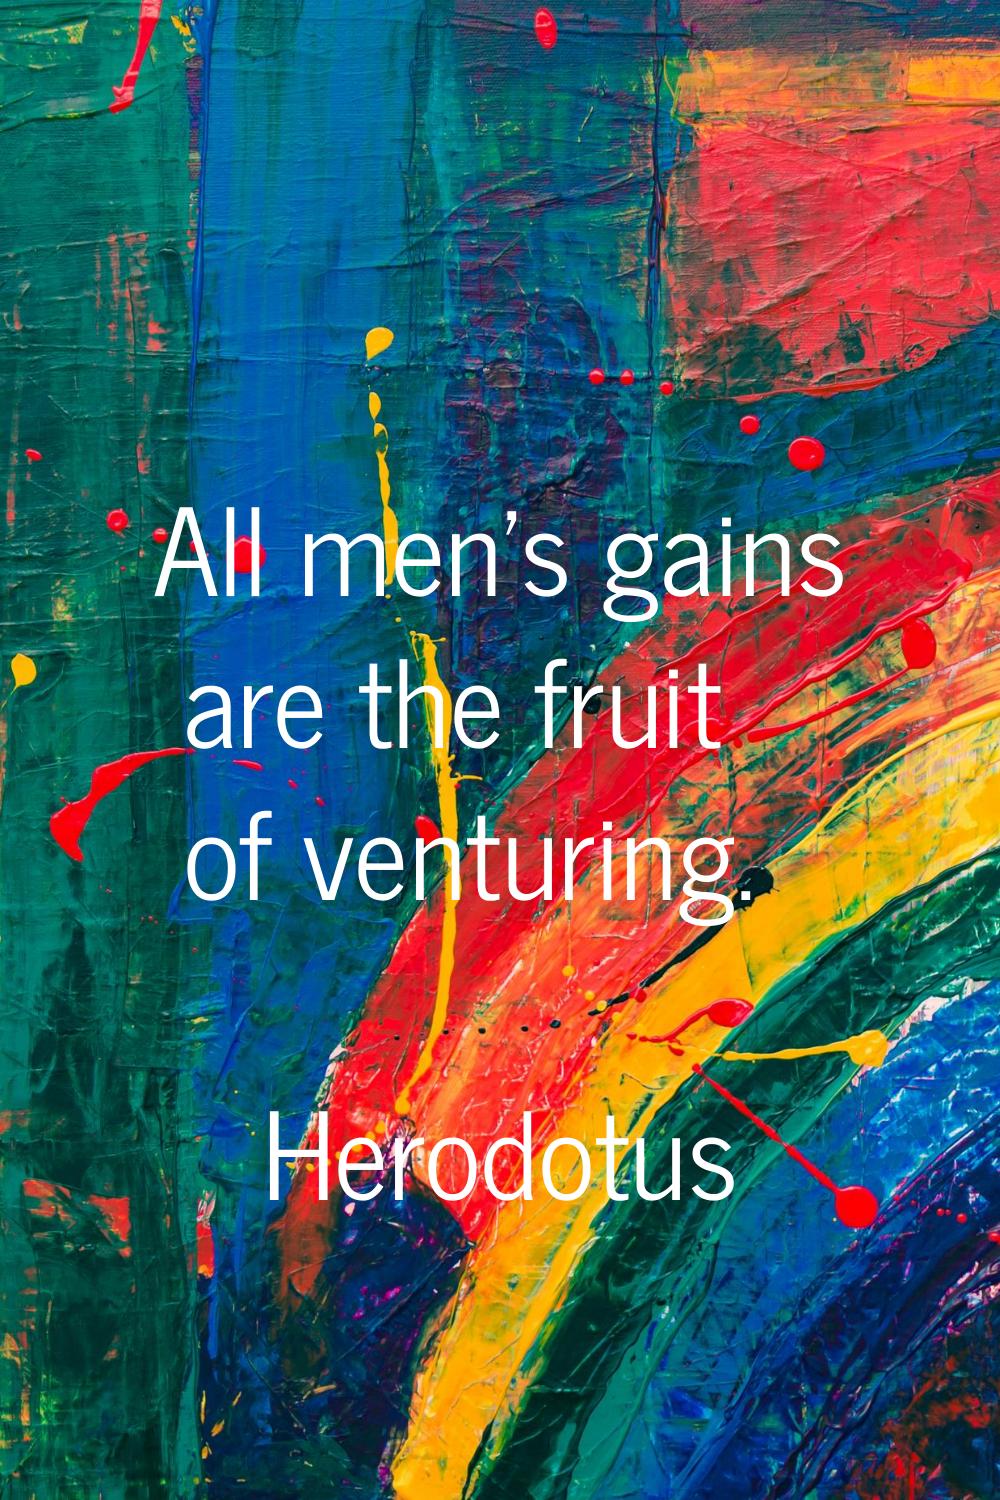 All men's gains are the fruit of venturing.